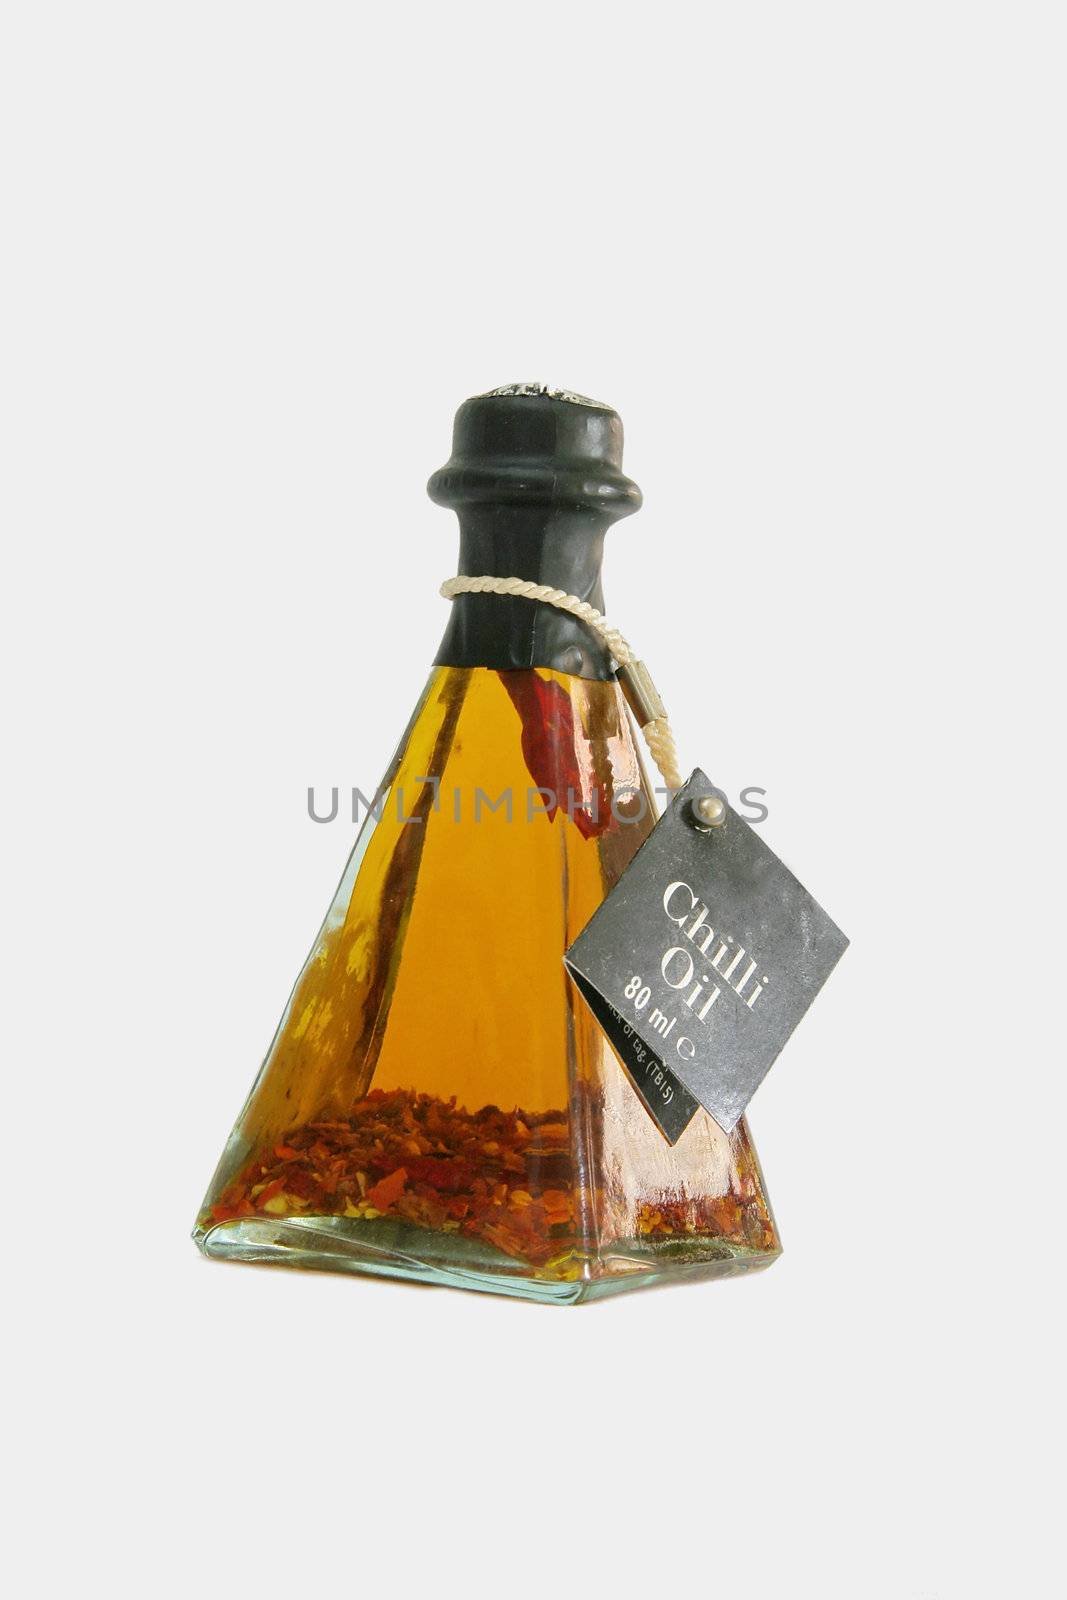 chilli oil by leafy